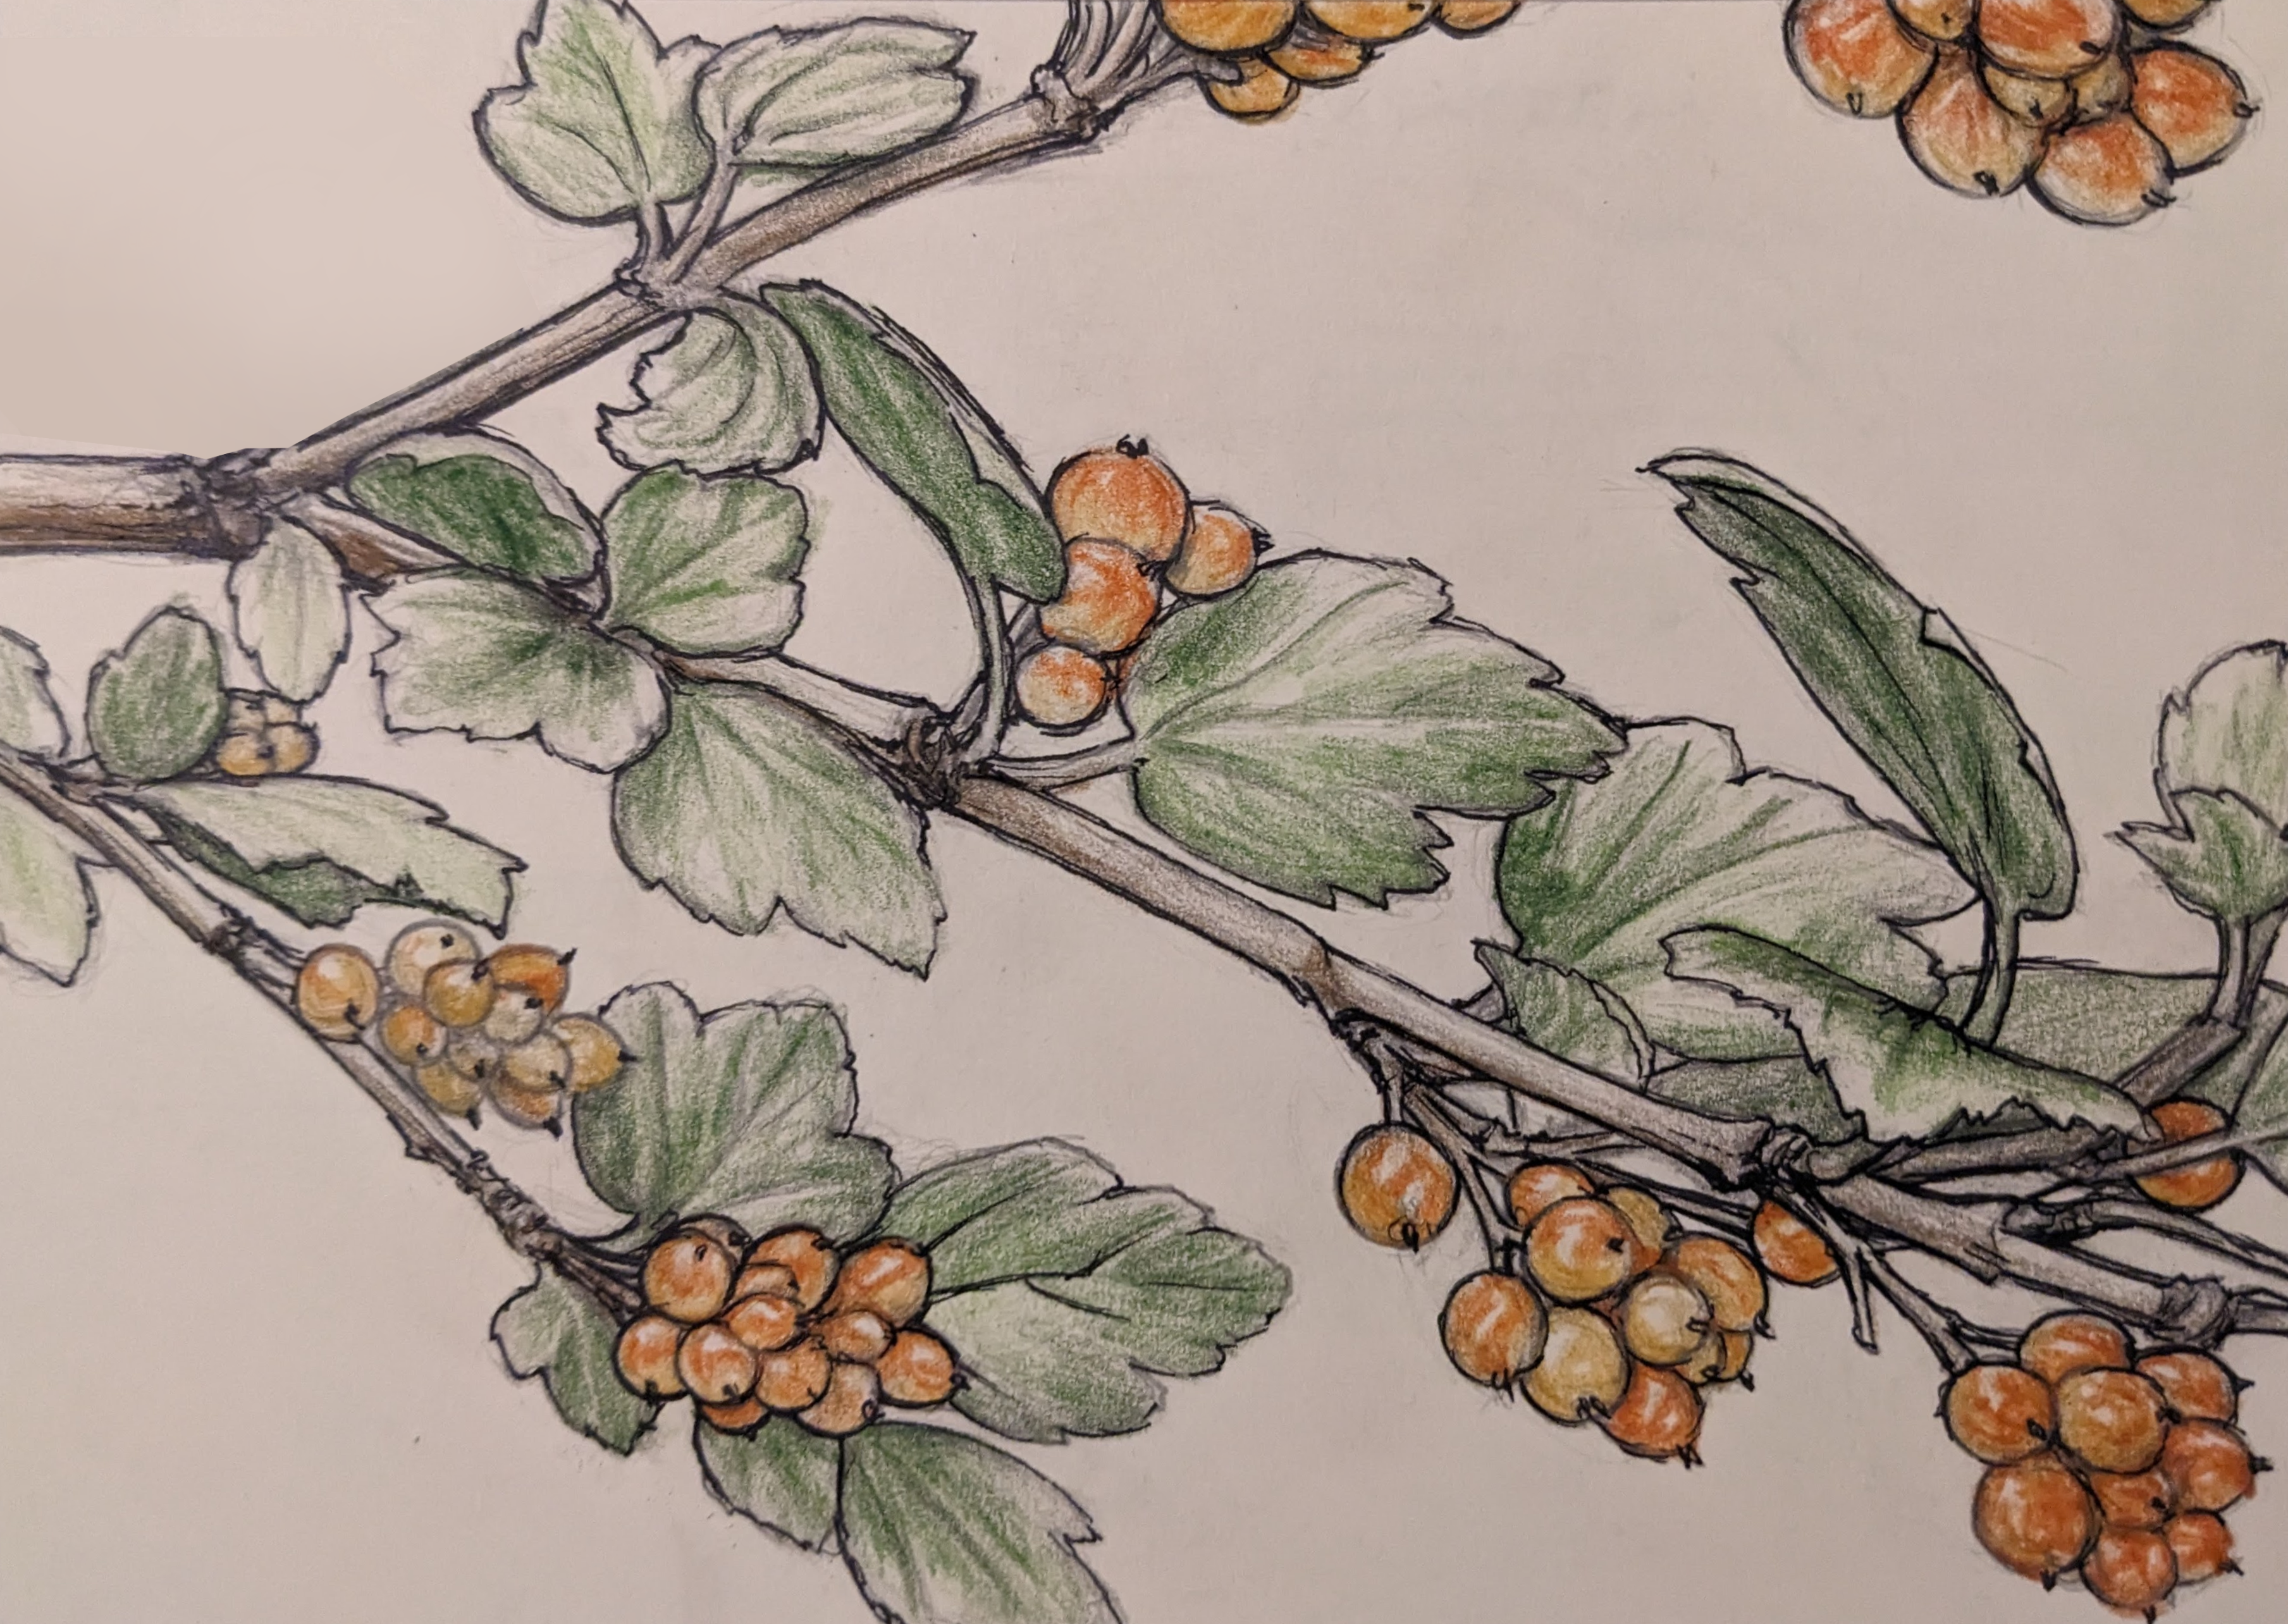 Colored pencil drawing of yellow berries on branches